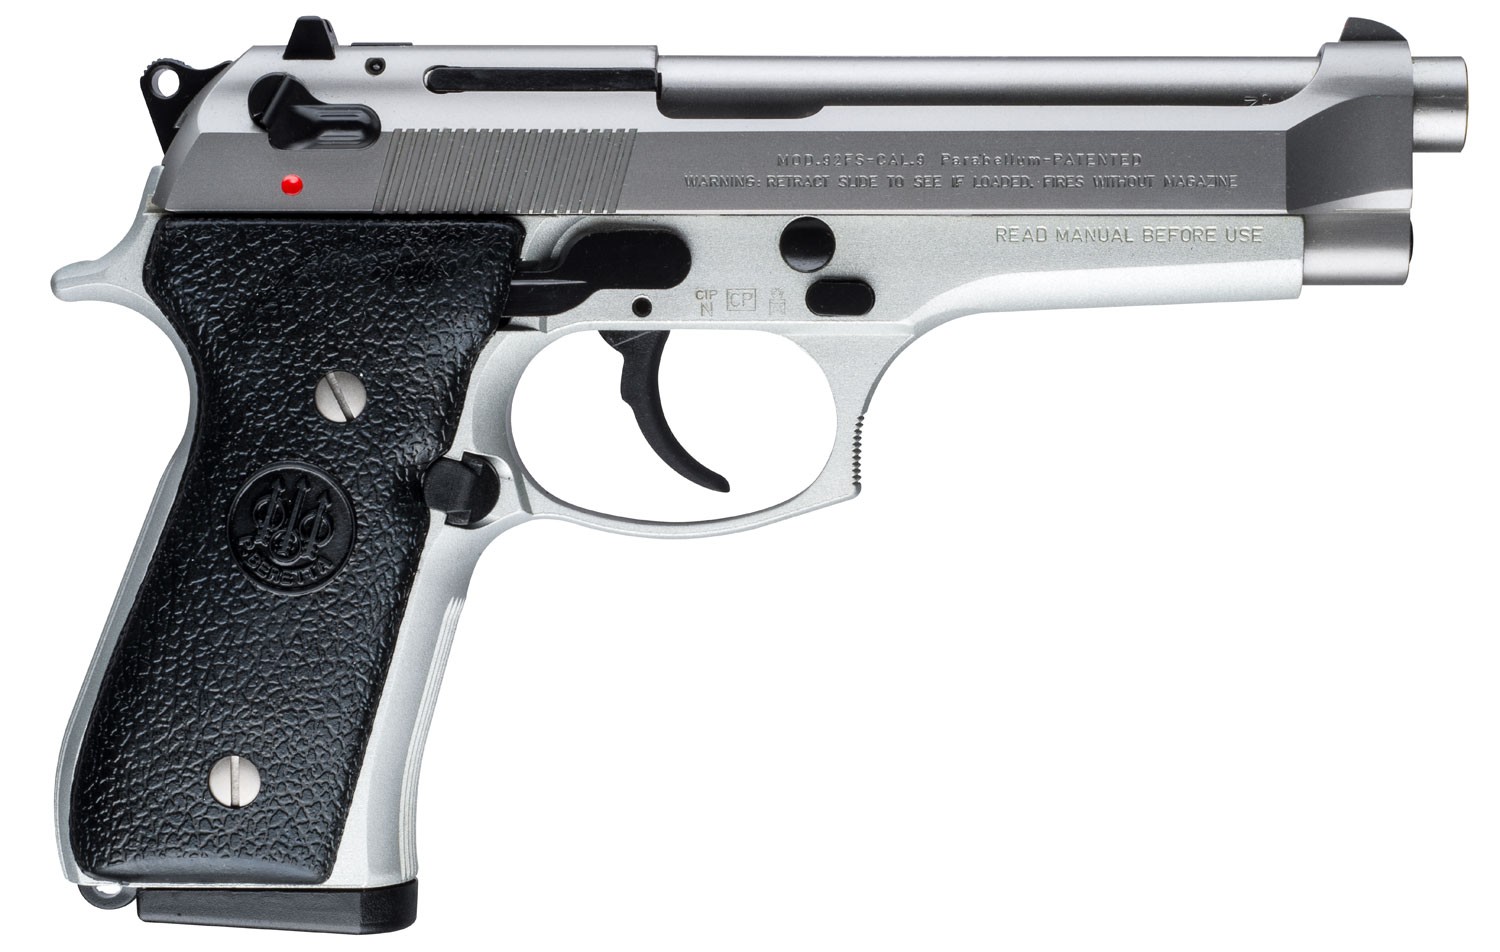  <BODY><P STYLE="FONT-FAMILY:ARIAL;"><P ALIGN="LEFT">
Manufacturer: Beretta</BR>
Manufacturer Part #: JS92F520</BR>
Model: 92FS</BR>
Action: Semi-automatic</BR>
Caliber: 9MM</BR>
Barrel Length: 4.9"</BR>
Frame/Material: Alloy</BR>
Finish/Color: Stainless</BR>
Capacity: 10Rd</BR>
<H1 STYLE="COLOR:GREEN">$775</H1></P></BODY></HTML>